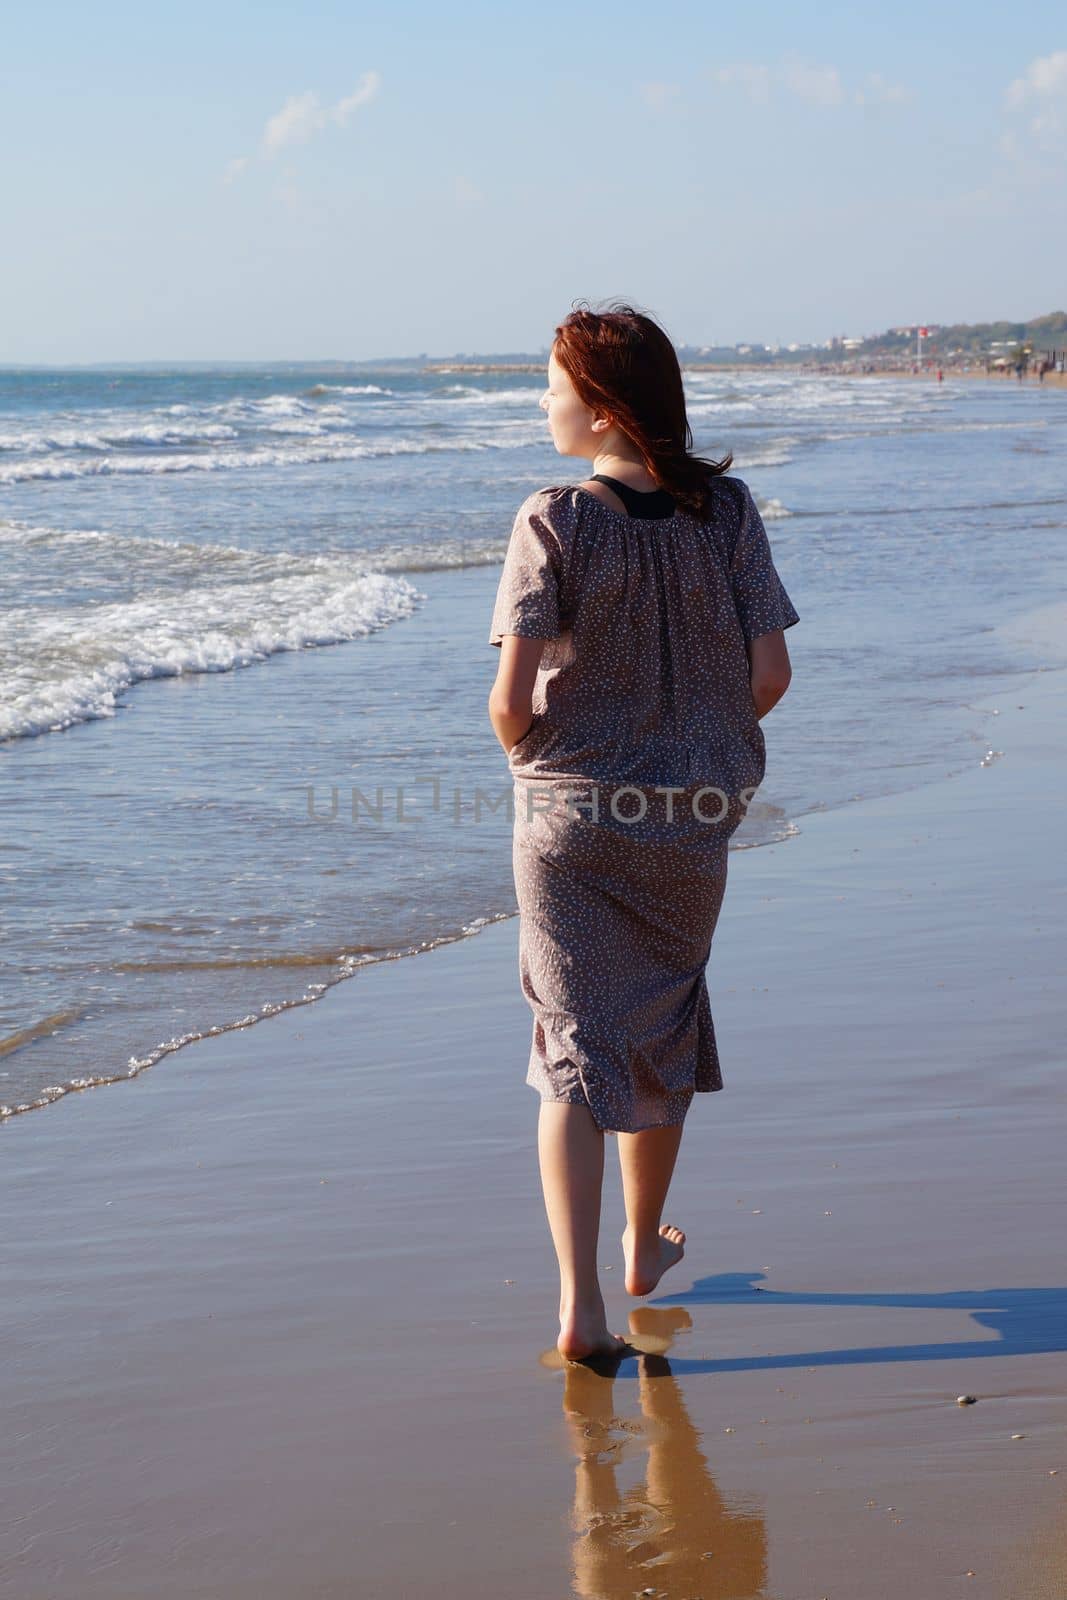 a red-haired barefoot teenage girl in a dress walks along the seashore along the water's edge, back view